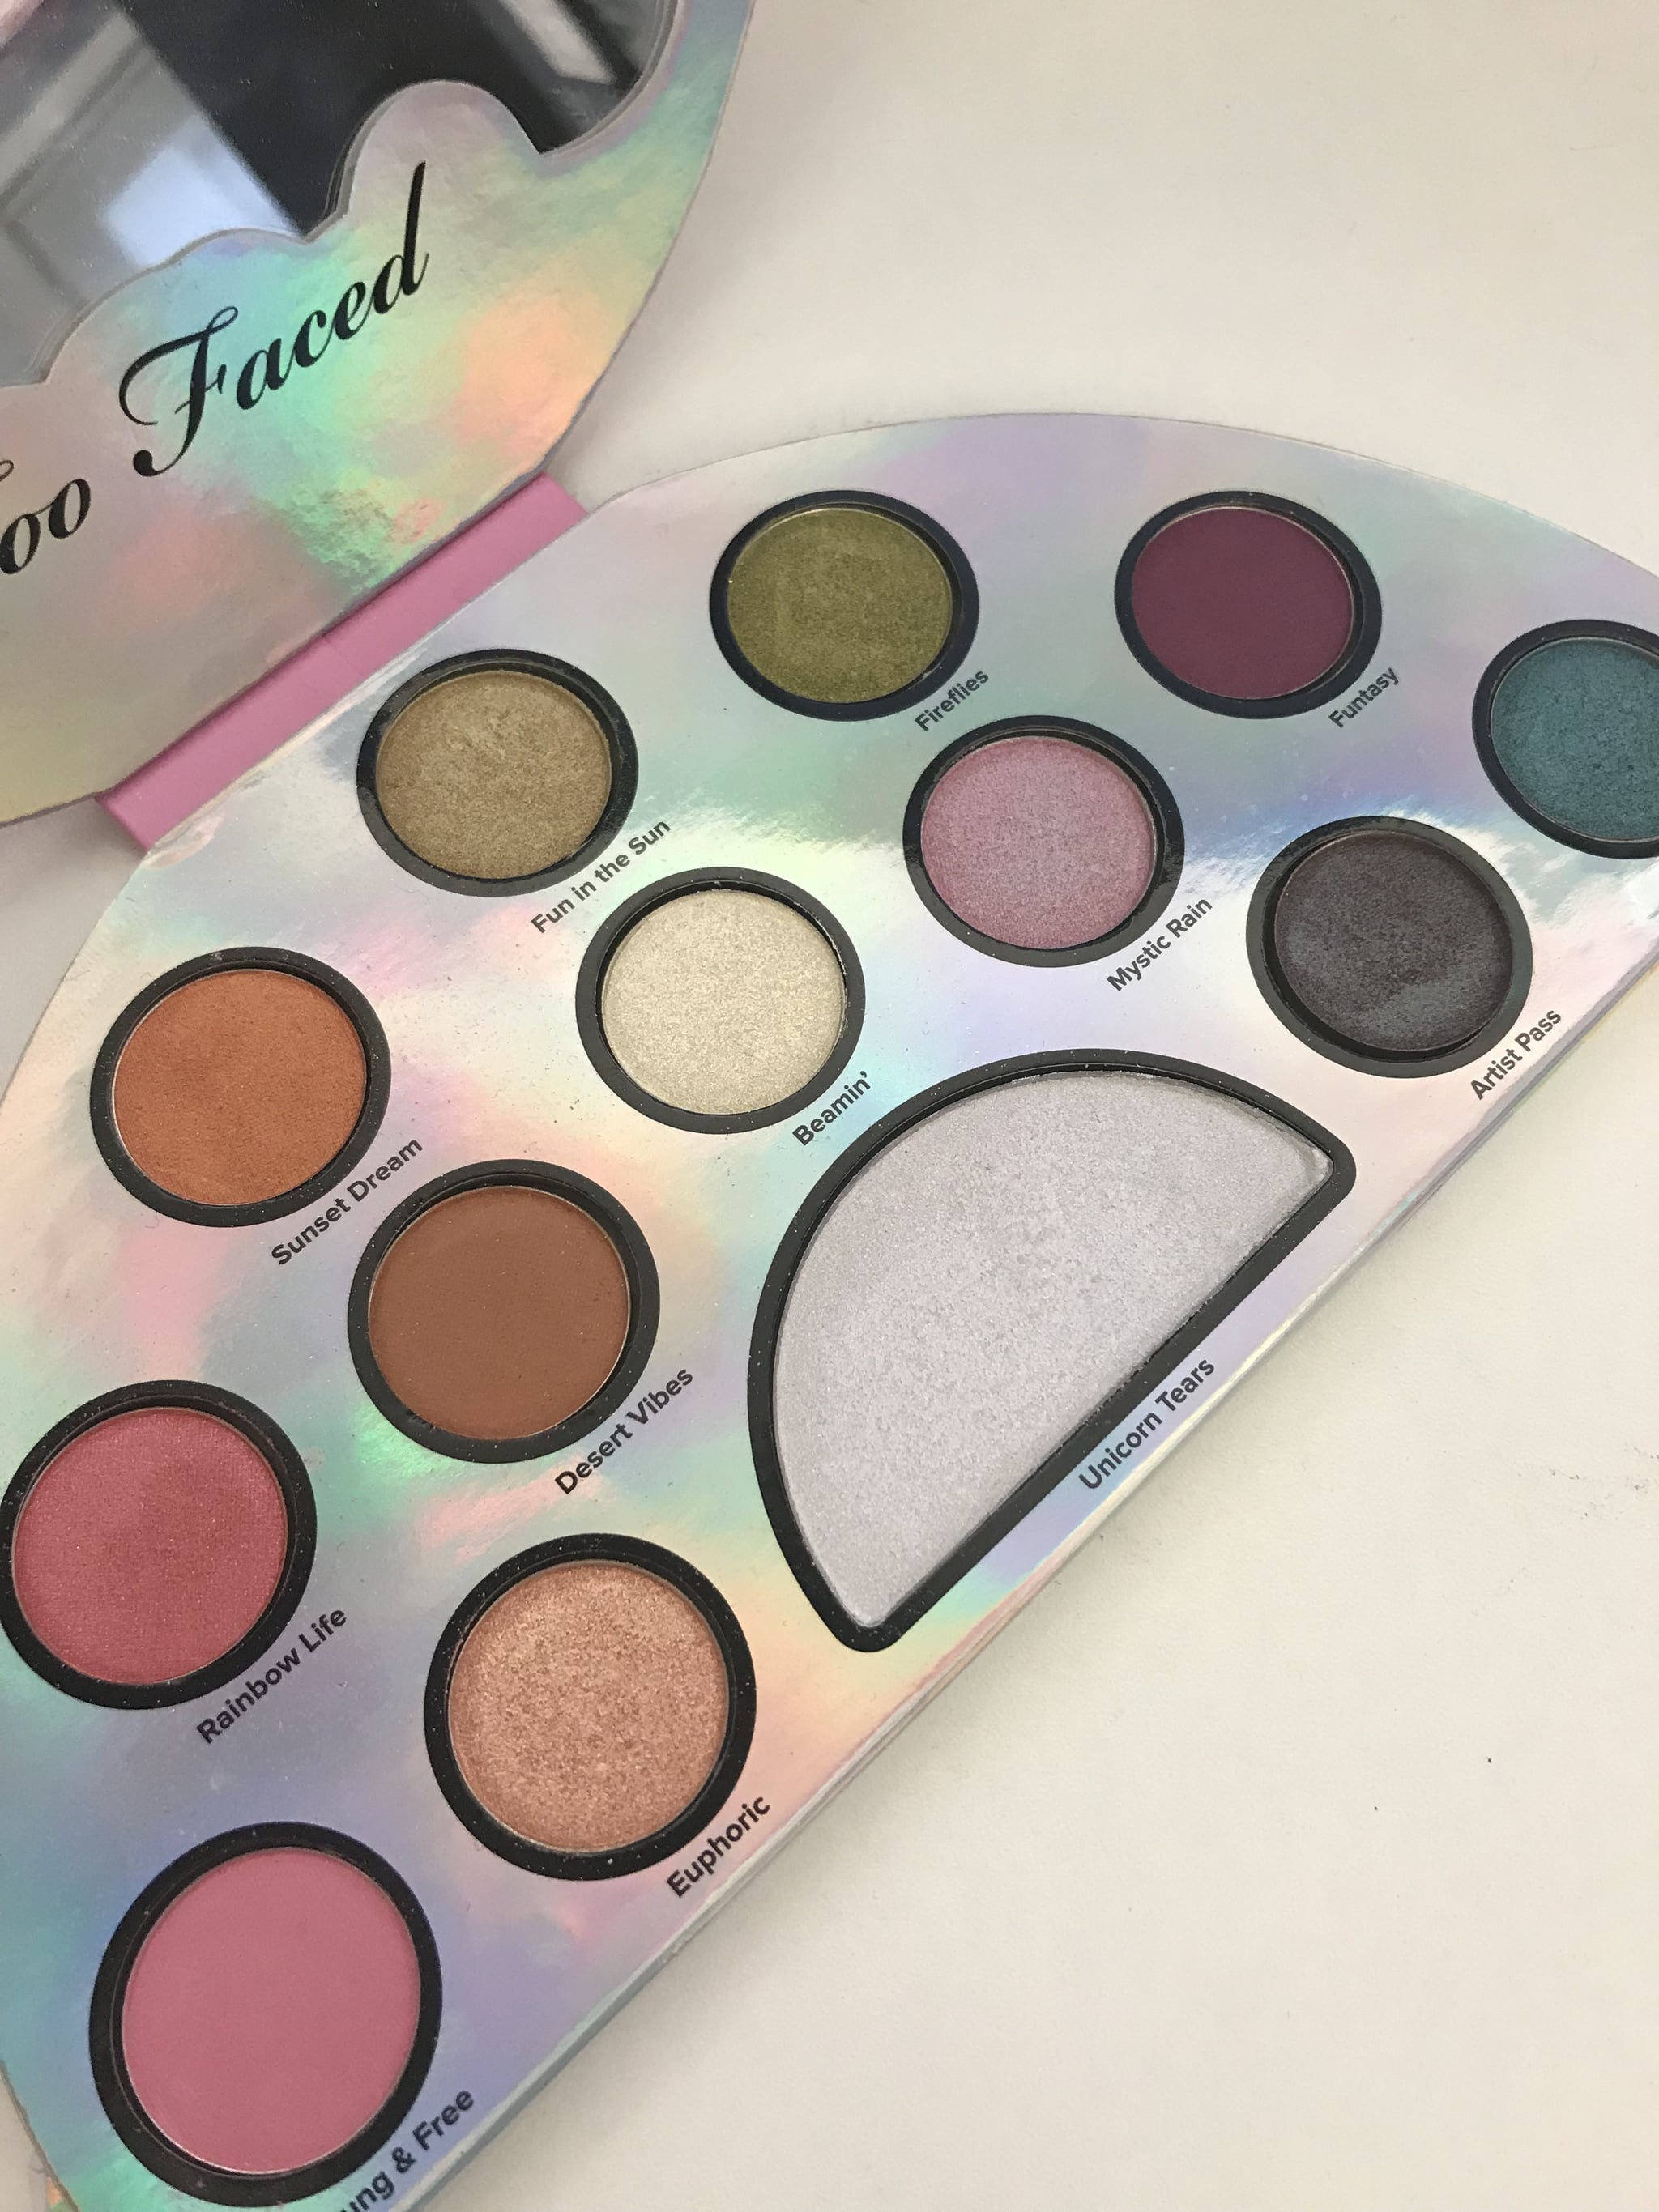 To faced life is. Too faced тени Life is a Festival. Too faced тени Unicorn. Eye Shadow Unicorn тени. Unicorn Rock палетка.